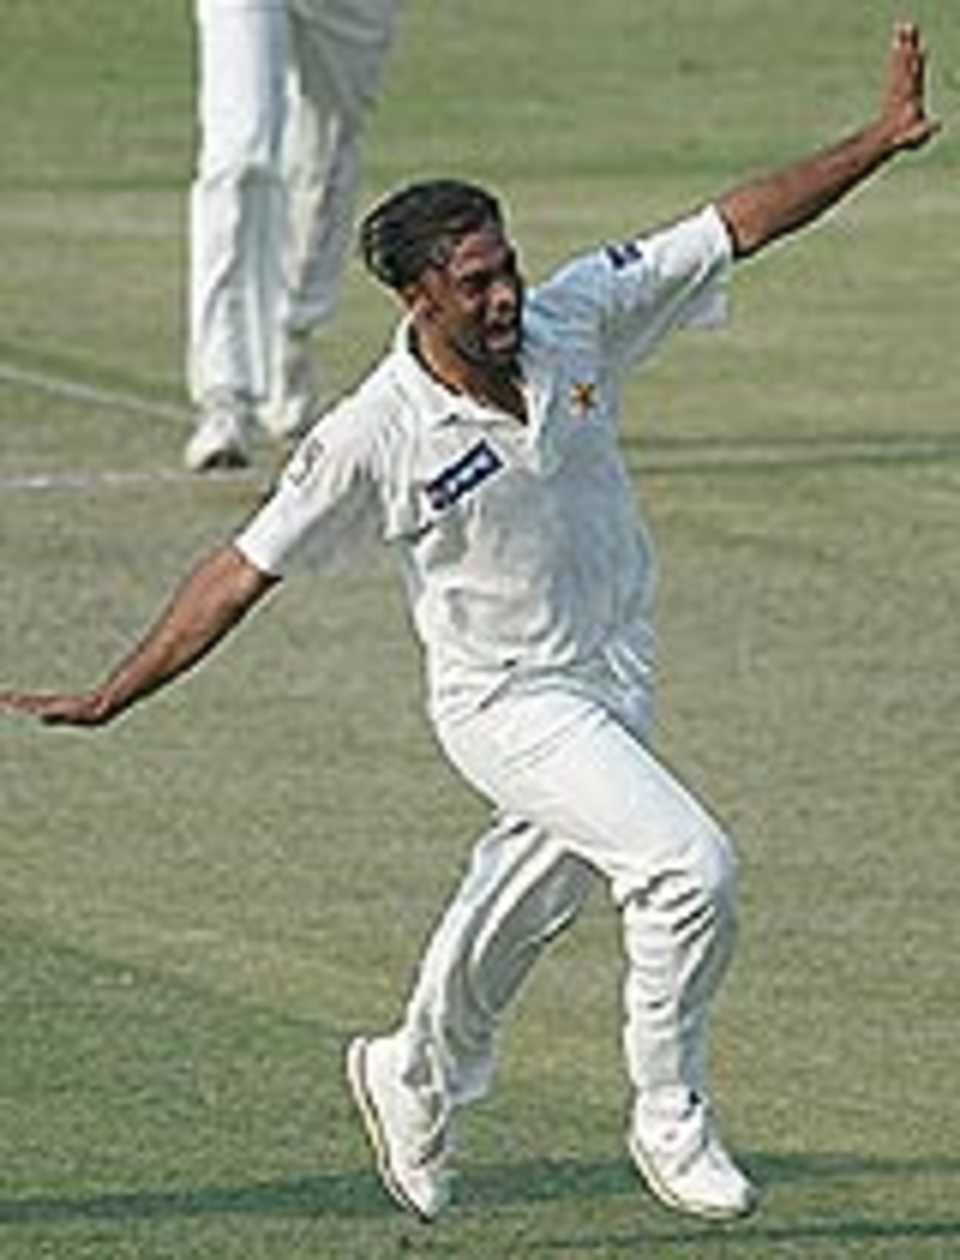 Shoaib Akhtar celebrates after scalping Paul Adams, Pakistan v South Africa 1st Test, Lahore, October 19 2003